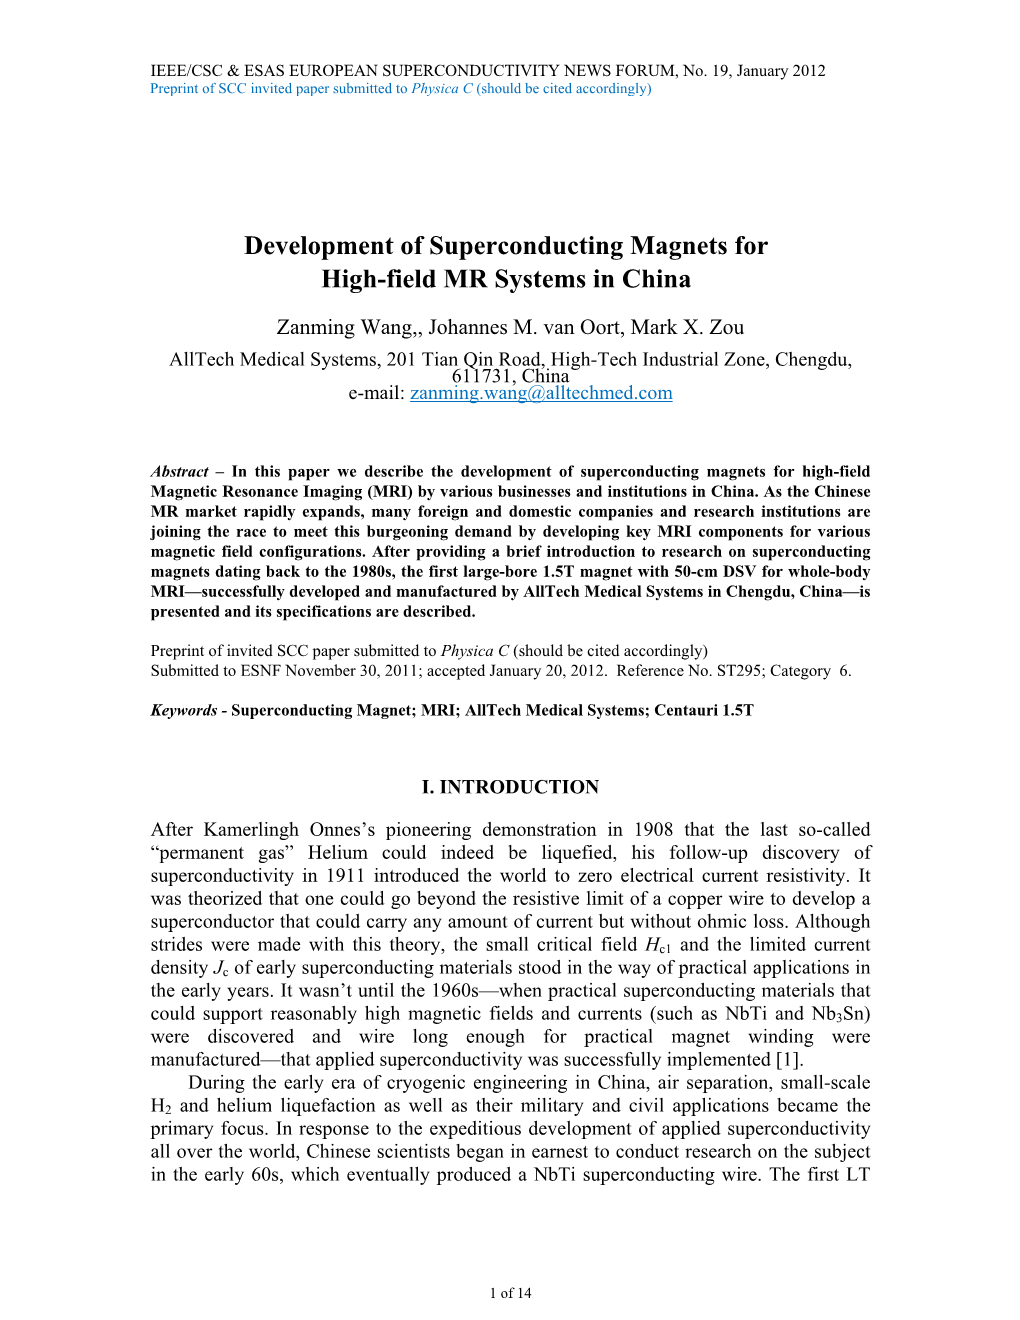 Development of Superconducting Magnets for High-Field MR Systems in China